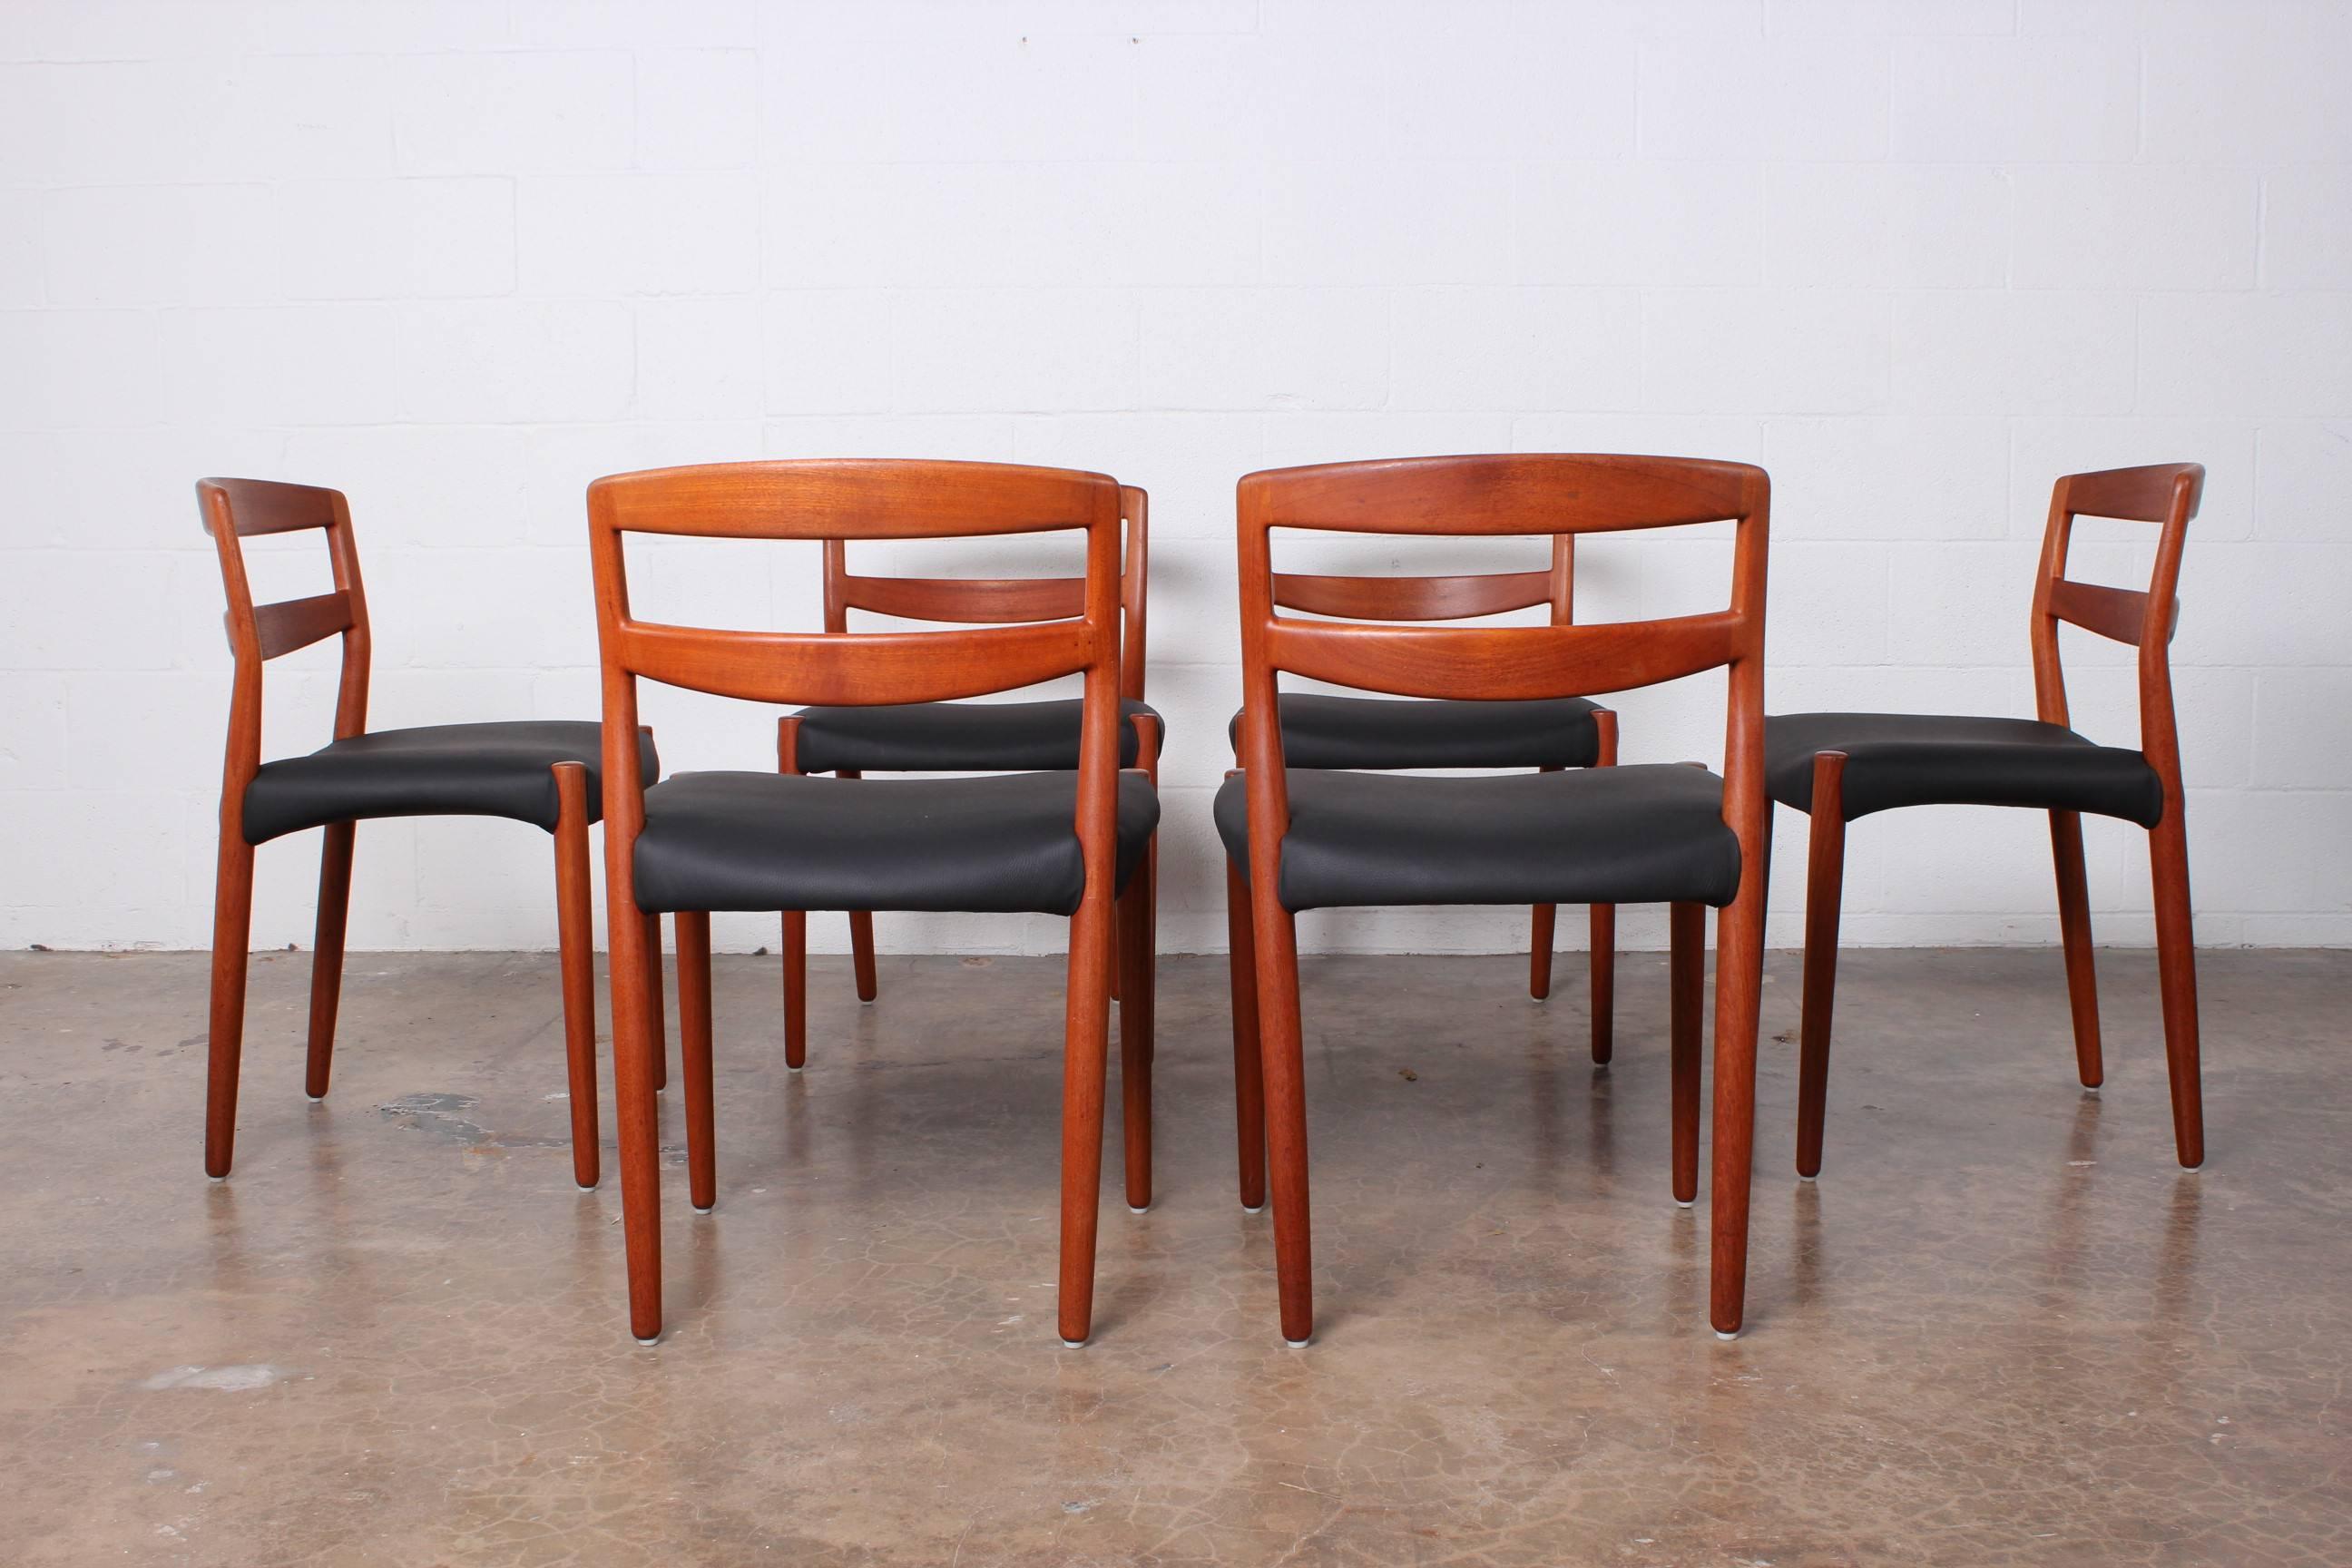 A set of six teak dining chairs deigned by Ejner Larsen and Aksel Bender Madsen for Willy Beck.